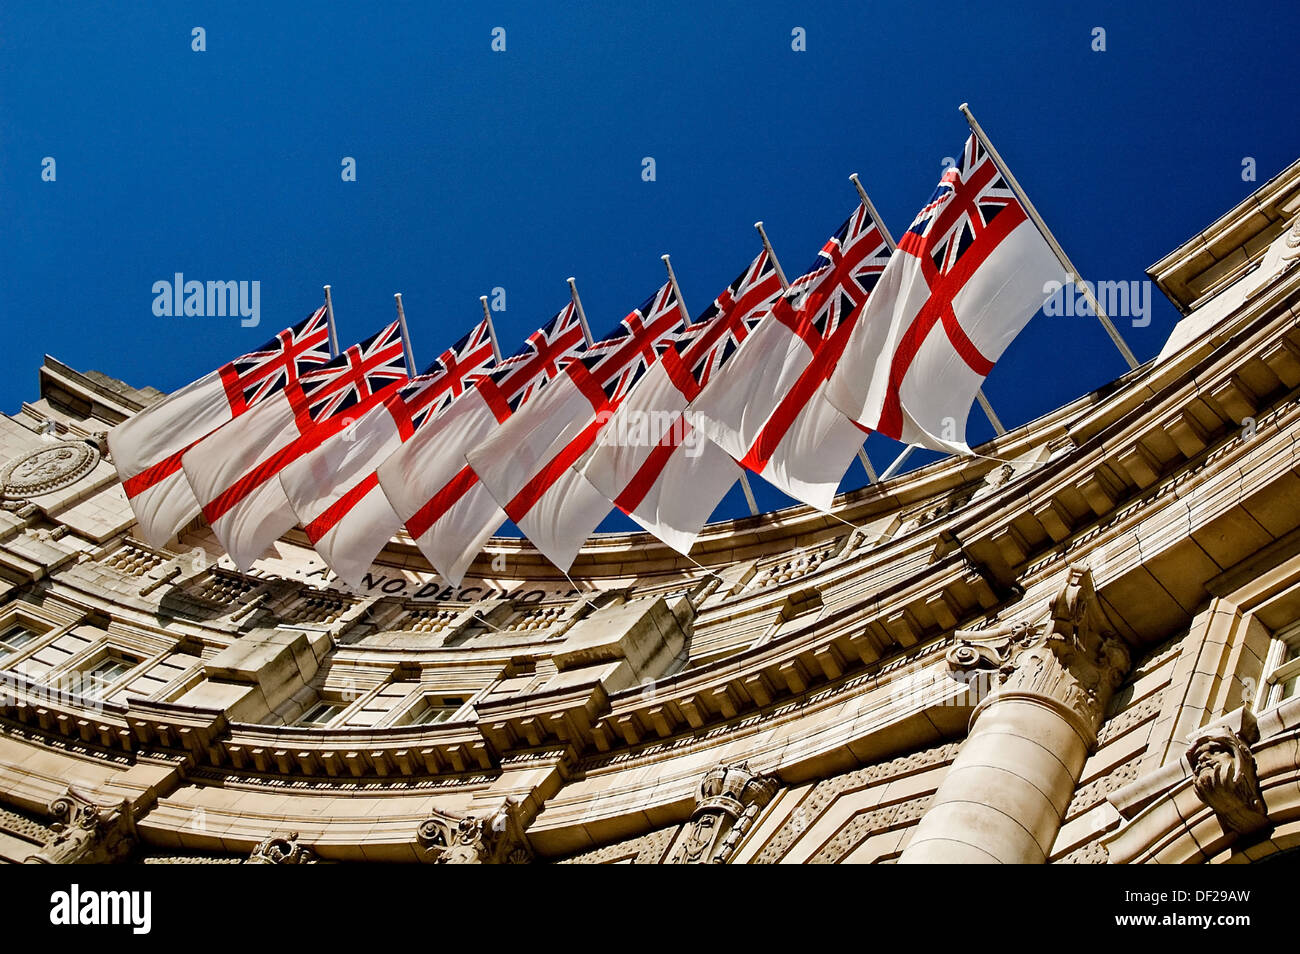 White ensign flags with the Union Jack and Cross of St George flying from Admiralty Arch, The Mall, London. Stock Photo